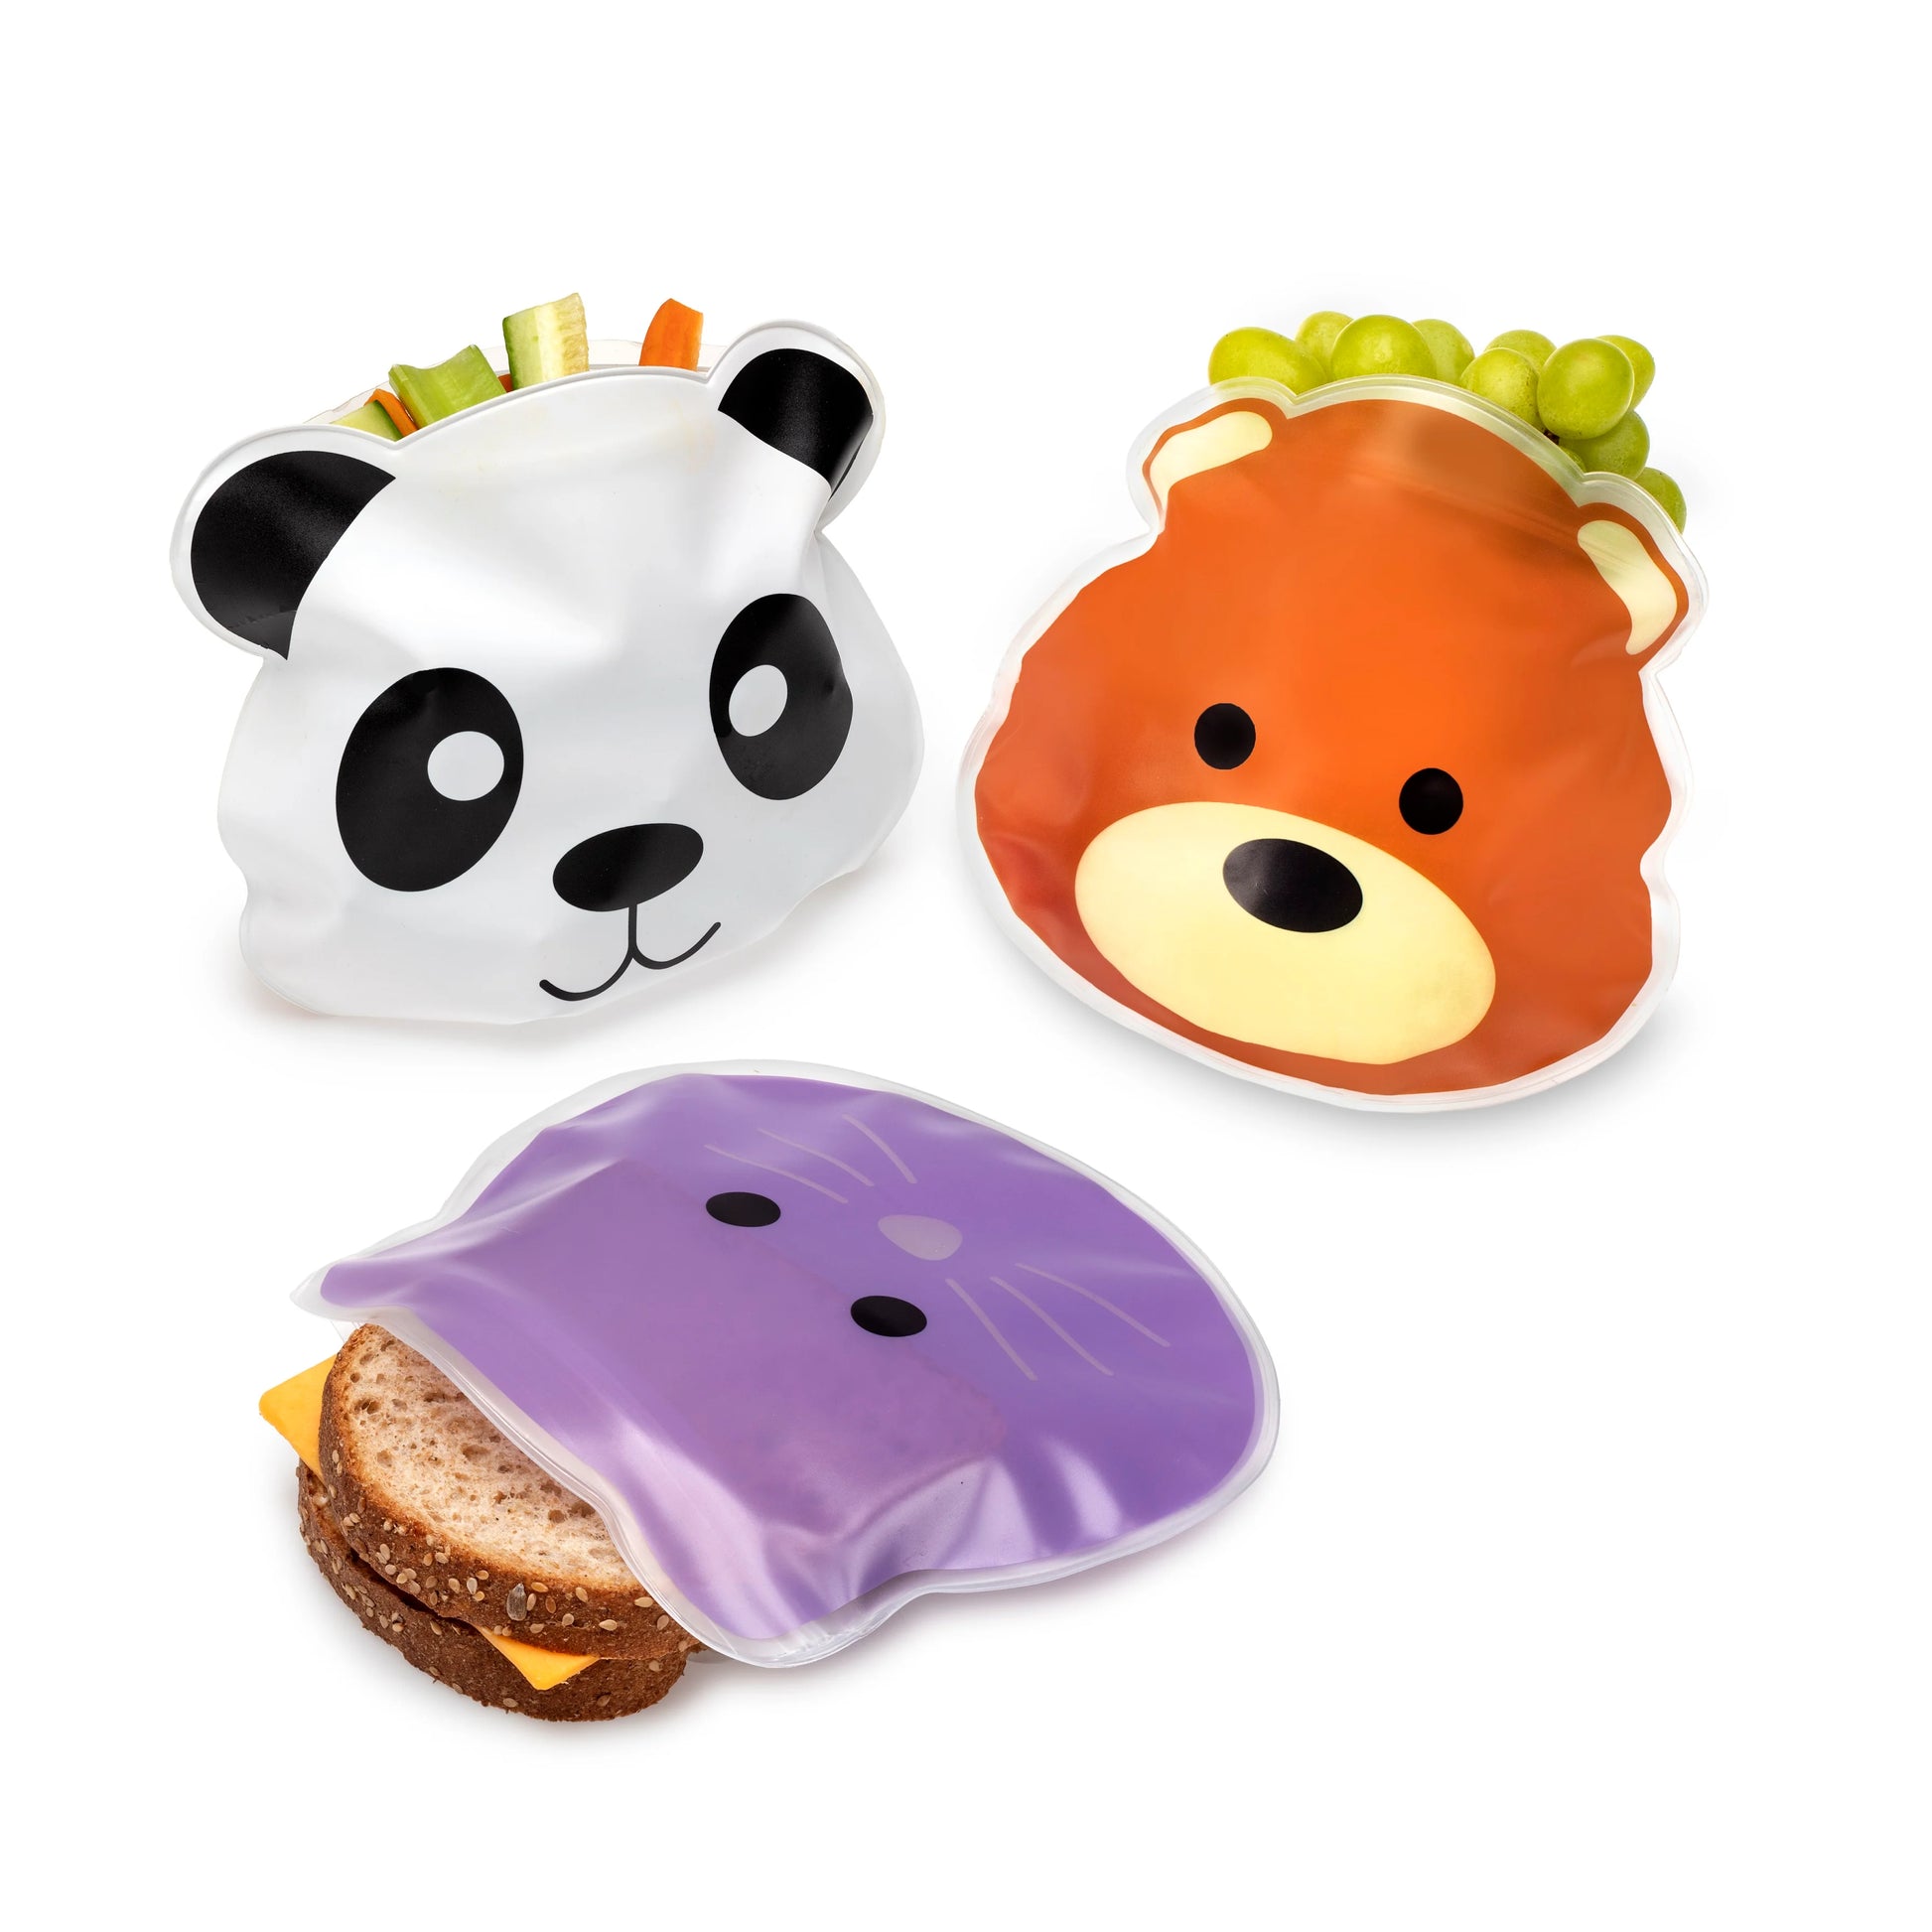 Pack everything from sandwiches to fruits, veggies, and crackers making healthy eating fun for your little ones, and then simply wash and reuse them again and again. The set includes 6 large-capacity bags featuring our signature Melii animal characters: Bulldog, Cat, Lion, Panda, Bear, and Shark and help you make a healthy and waste-free choice for your always-on-the-go family!